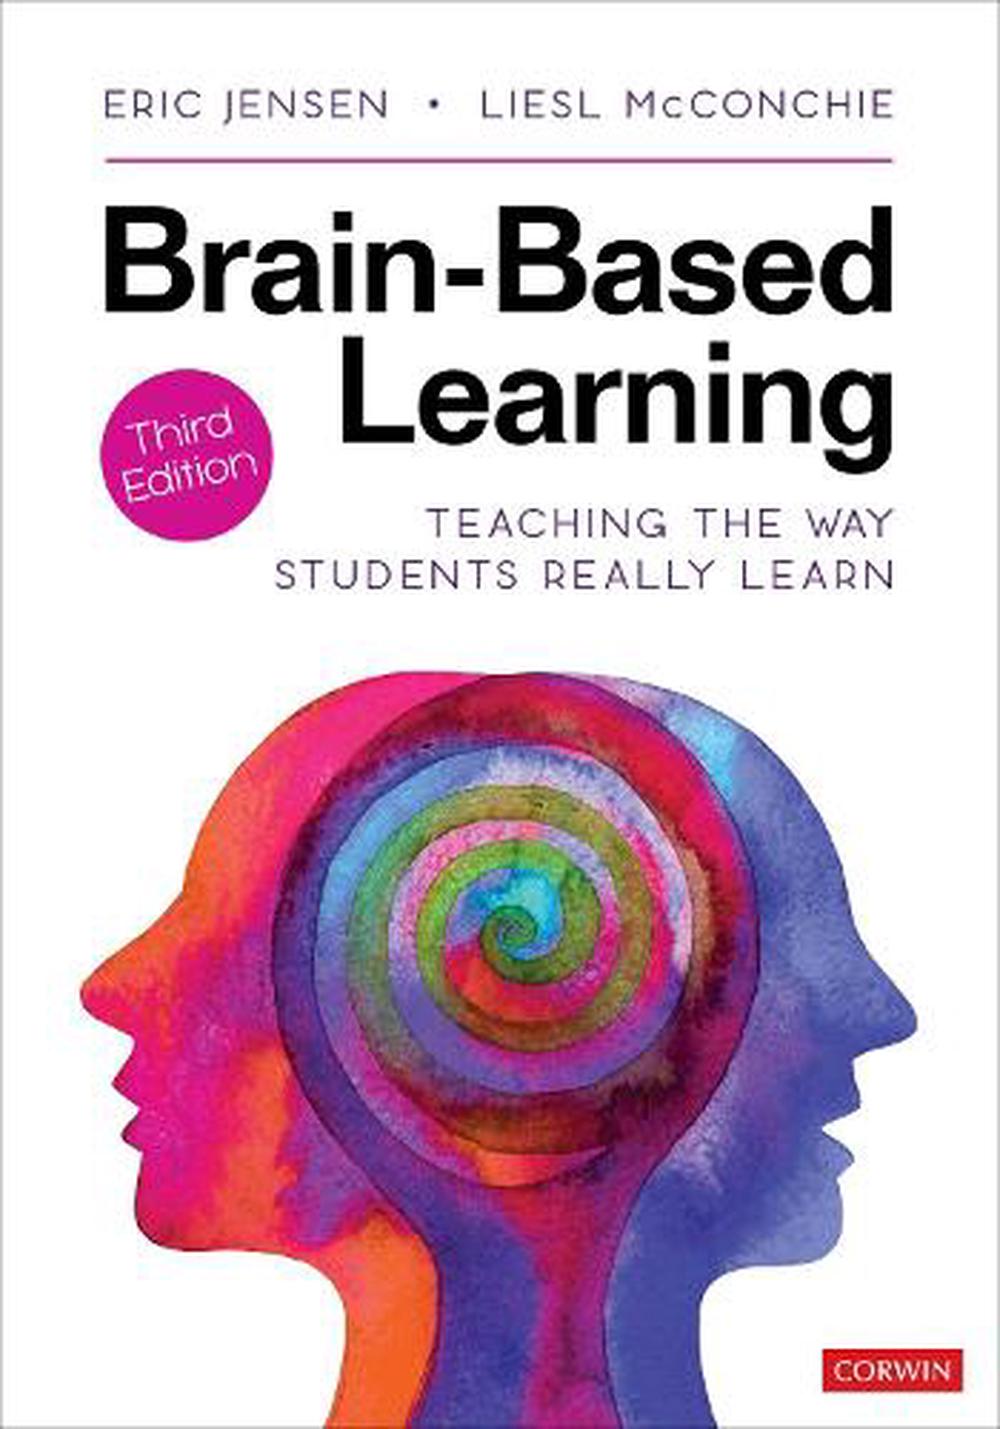 Brainbased Learning Teaching the Way Students Learn by